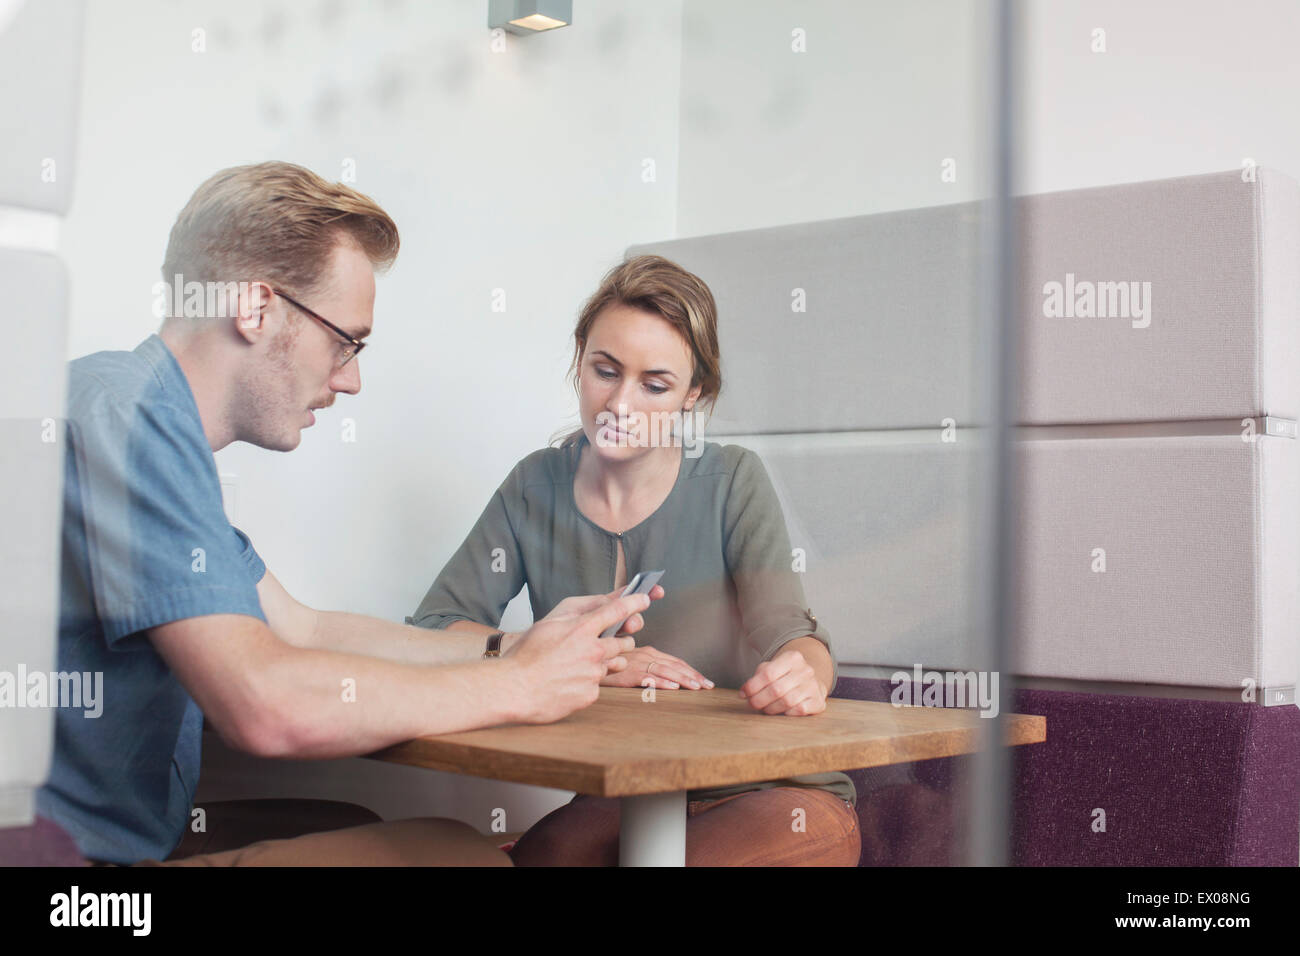 Colleagues looking at digital tablet in meeting Stock Photo